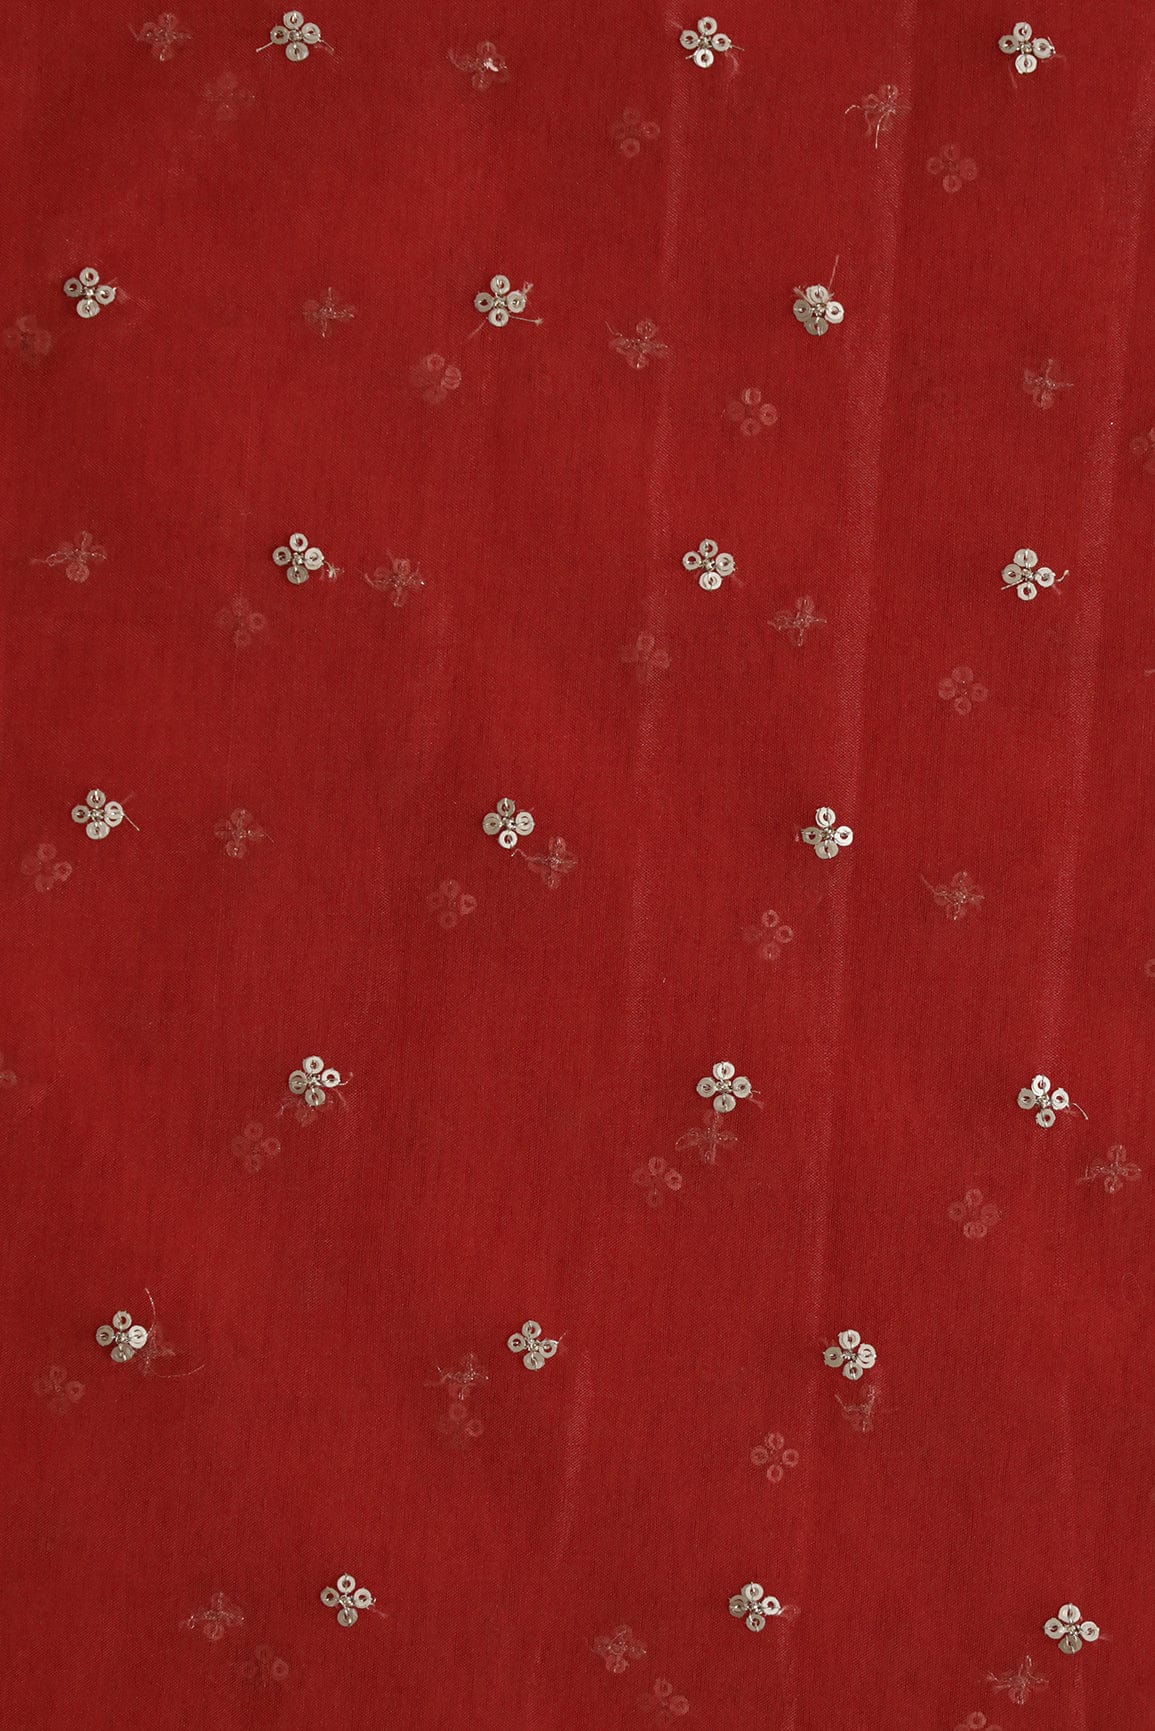 doeraa Embroidery Fabrics Gold Sequins Small Motif Embroidery Work On Red Organza Fabric